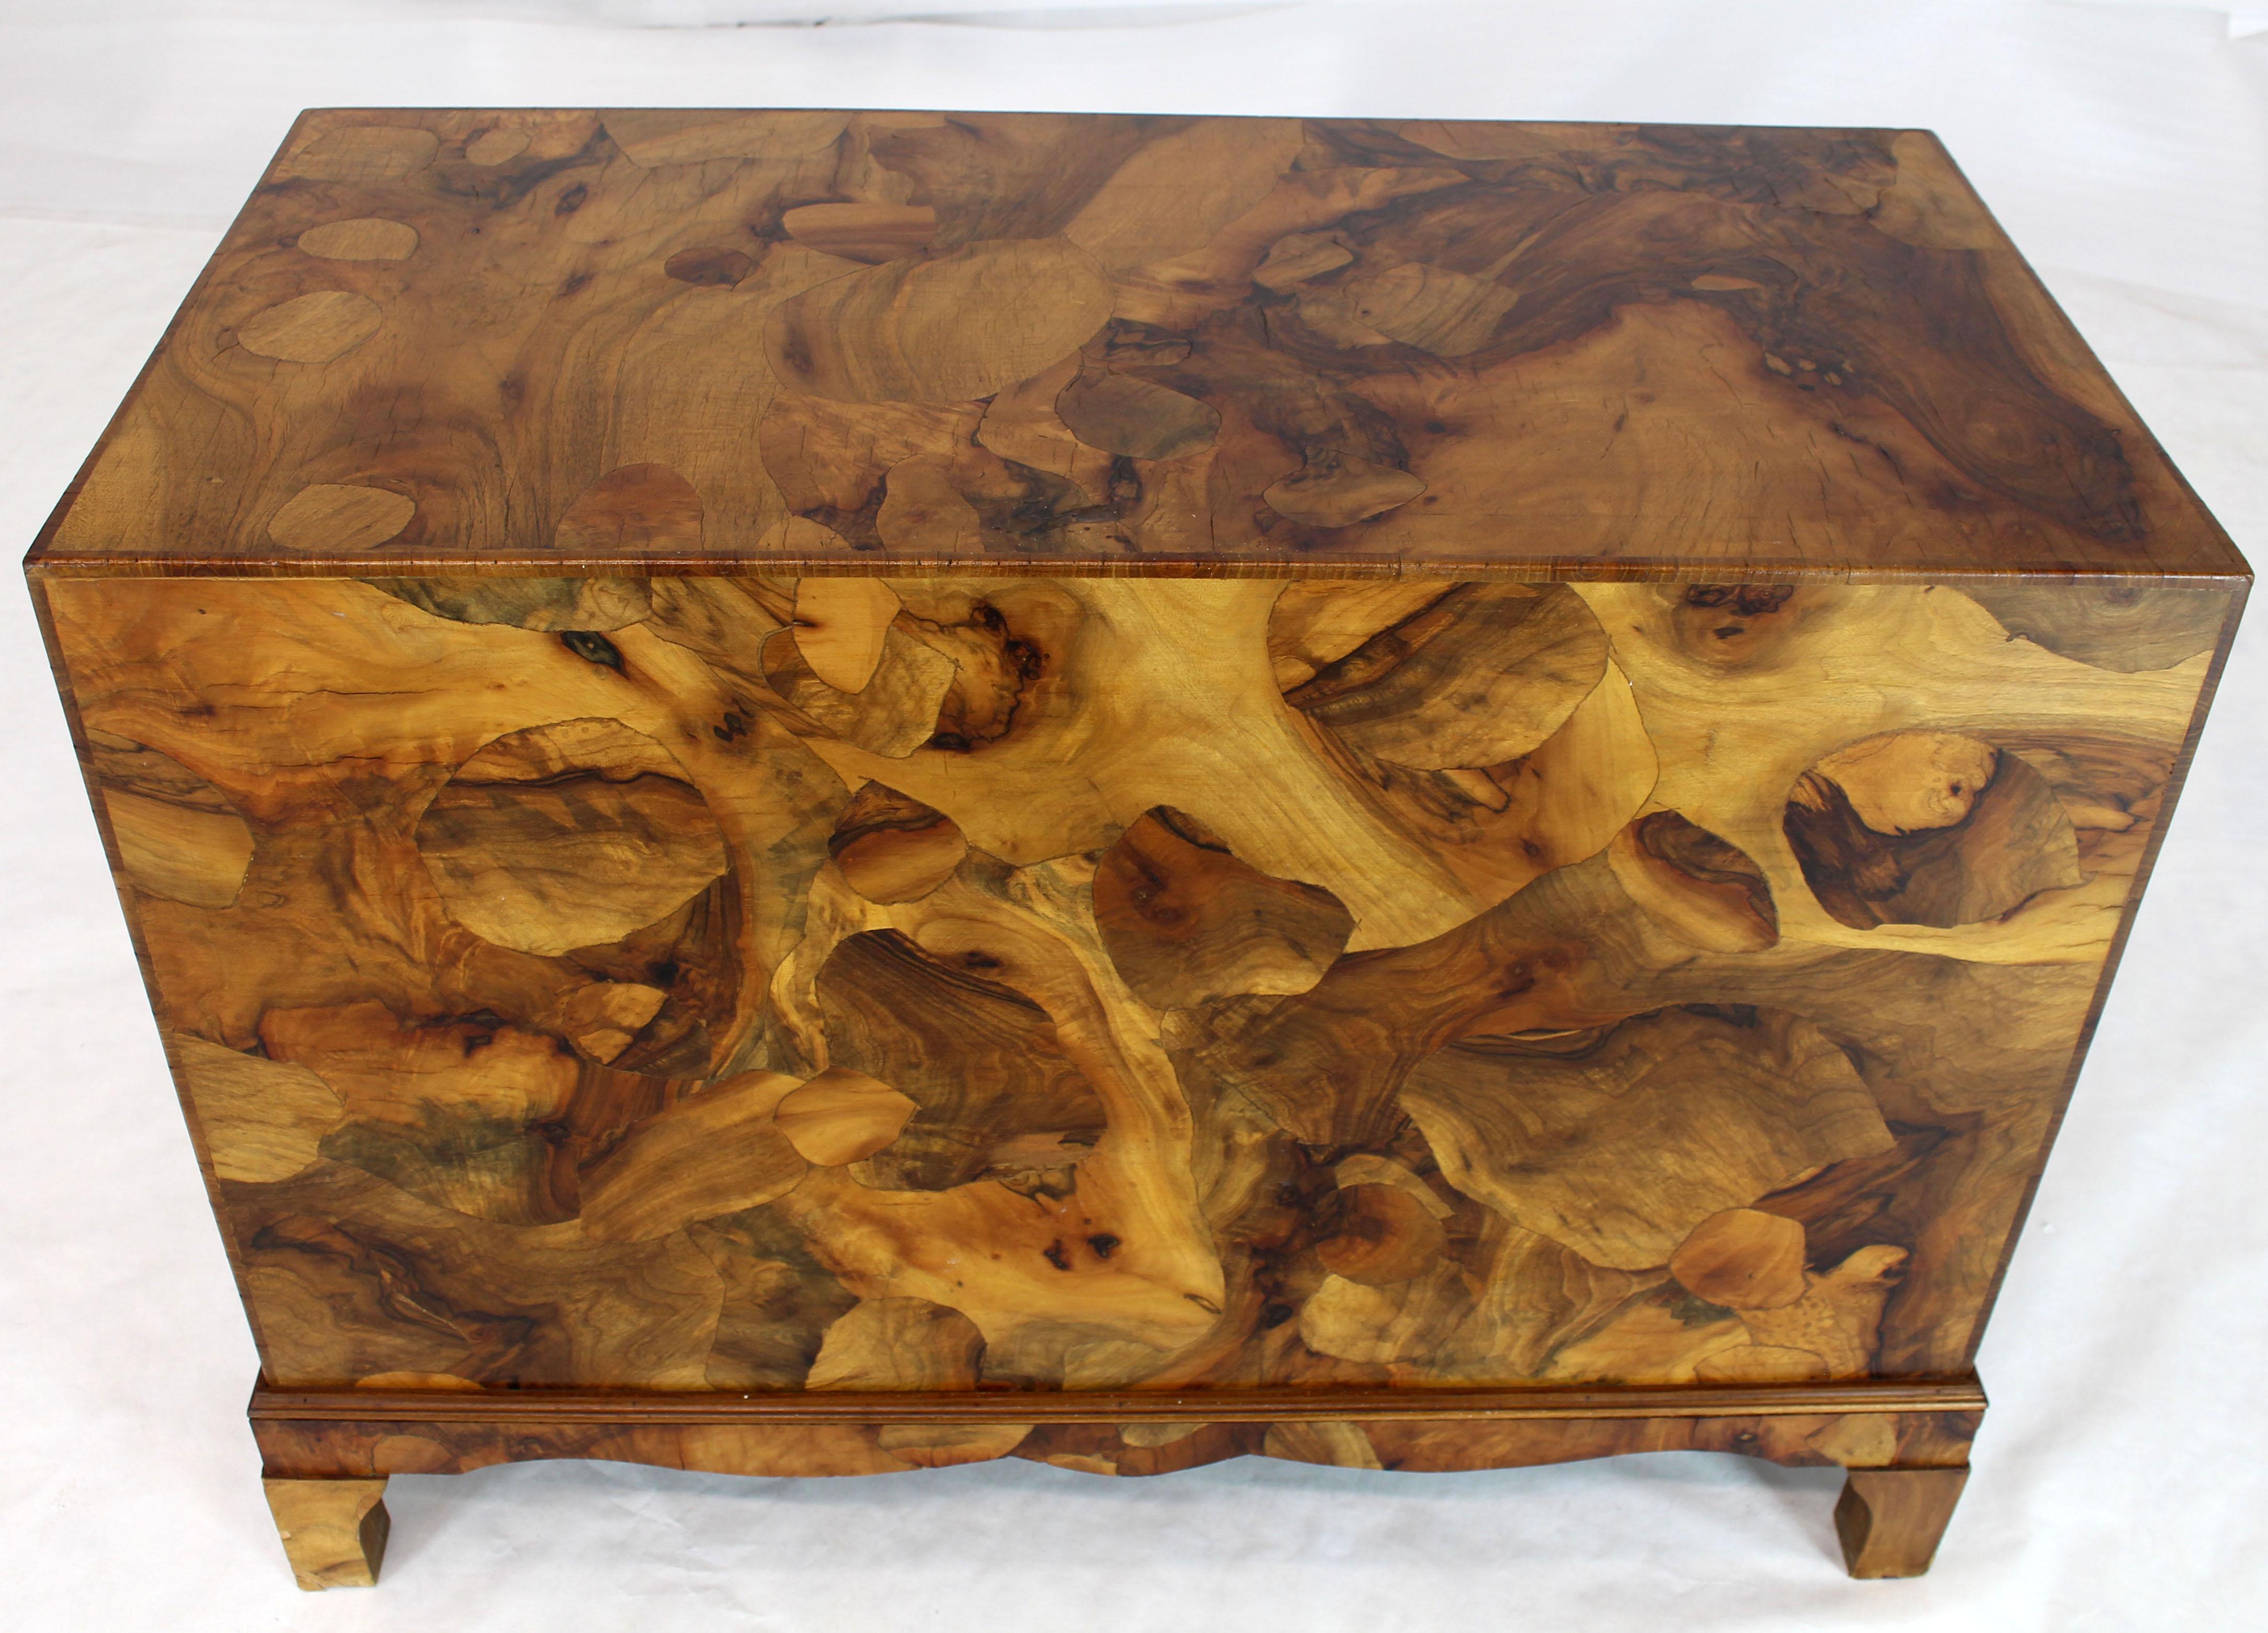 Vivid burl wood patch work Italian Mid-Century Modern Campaign bachelor chest. Beautiful finished back exposing a 